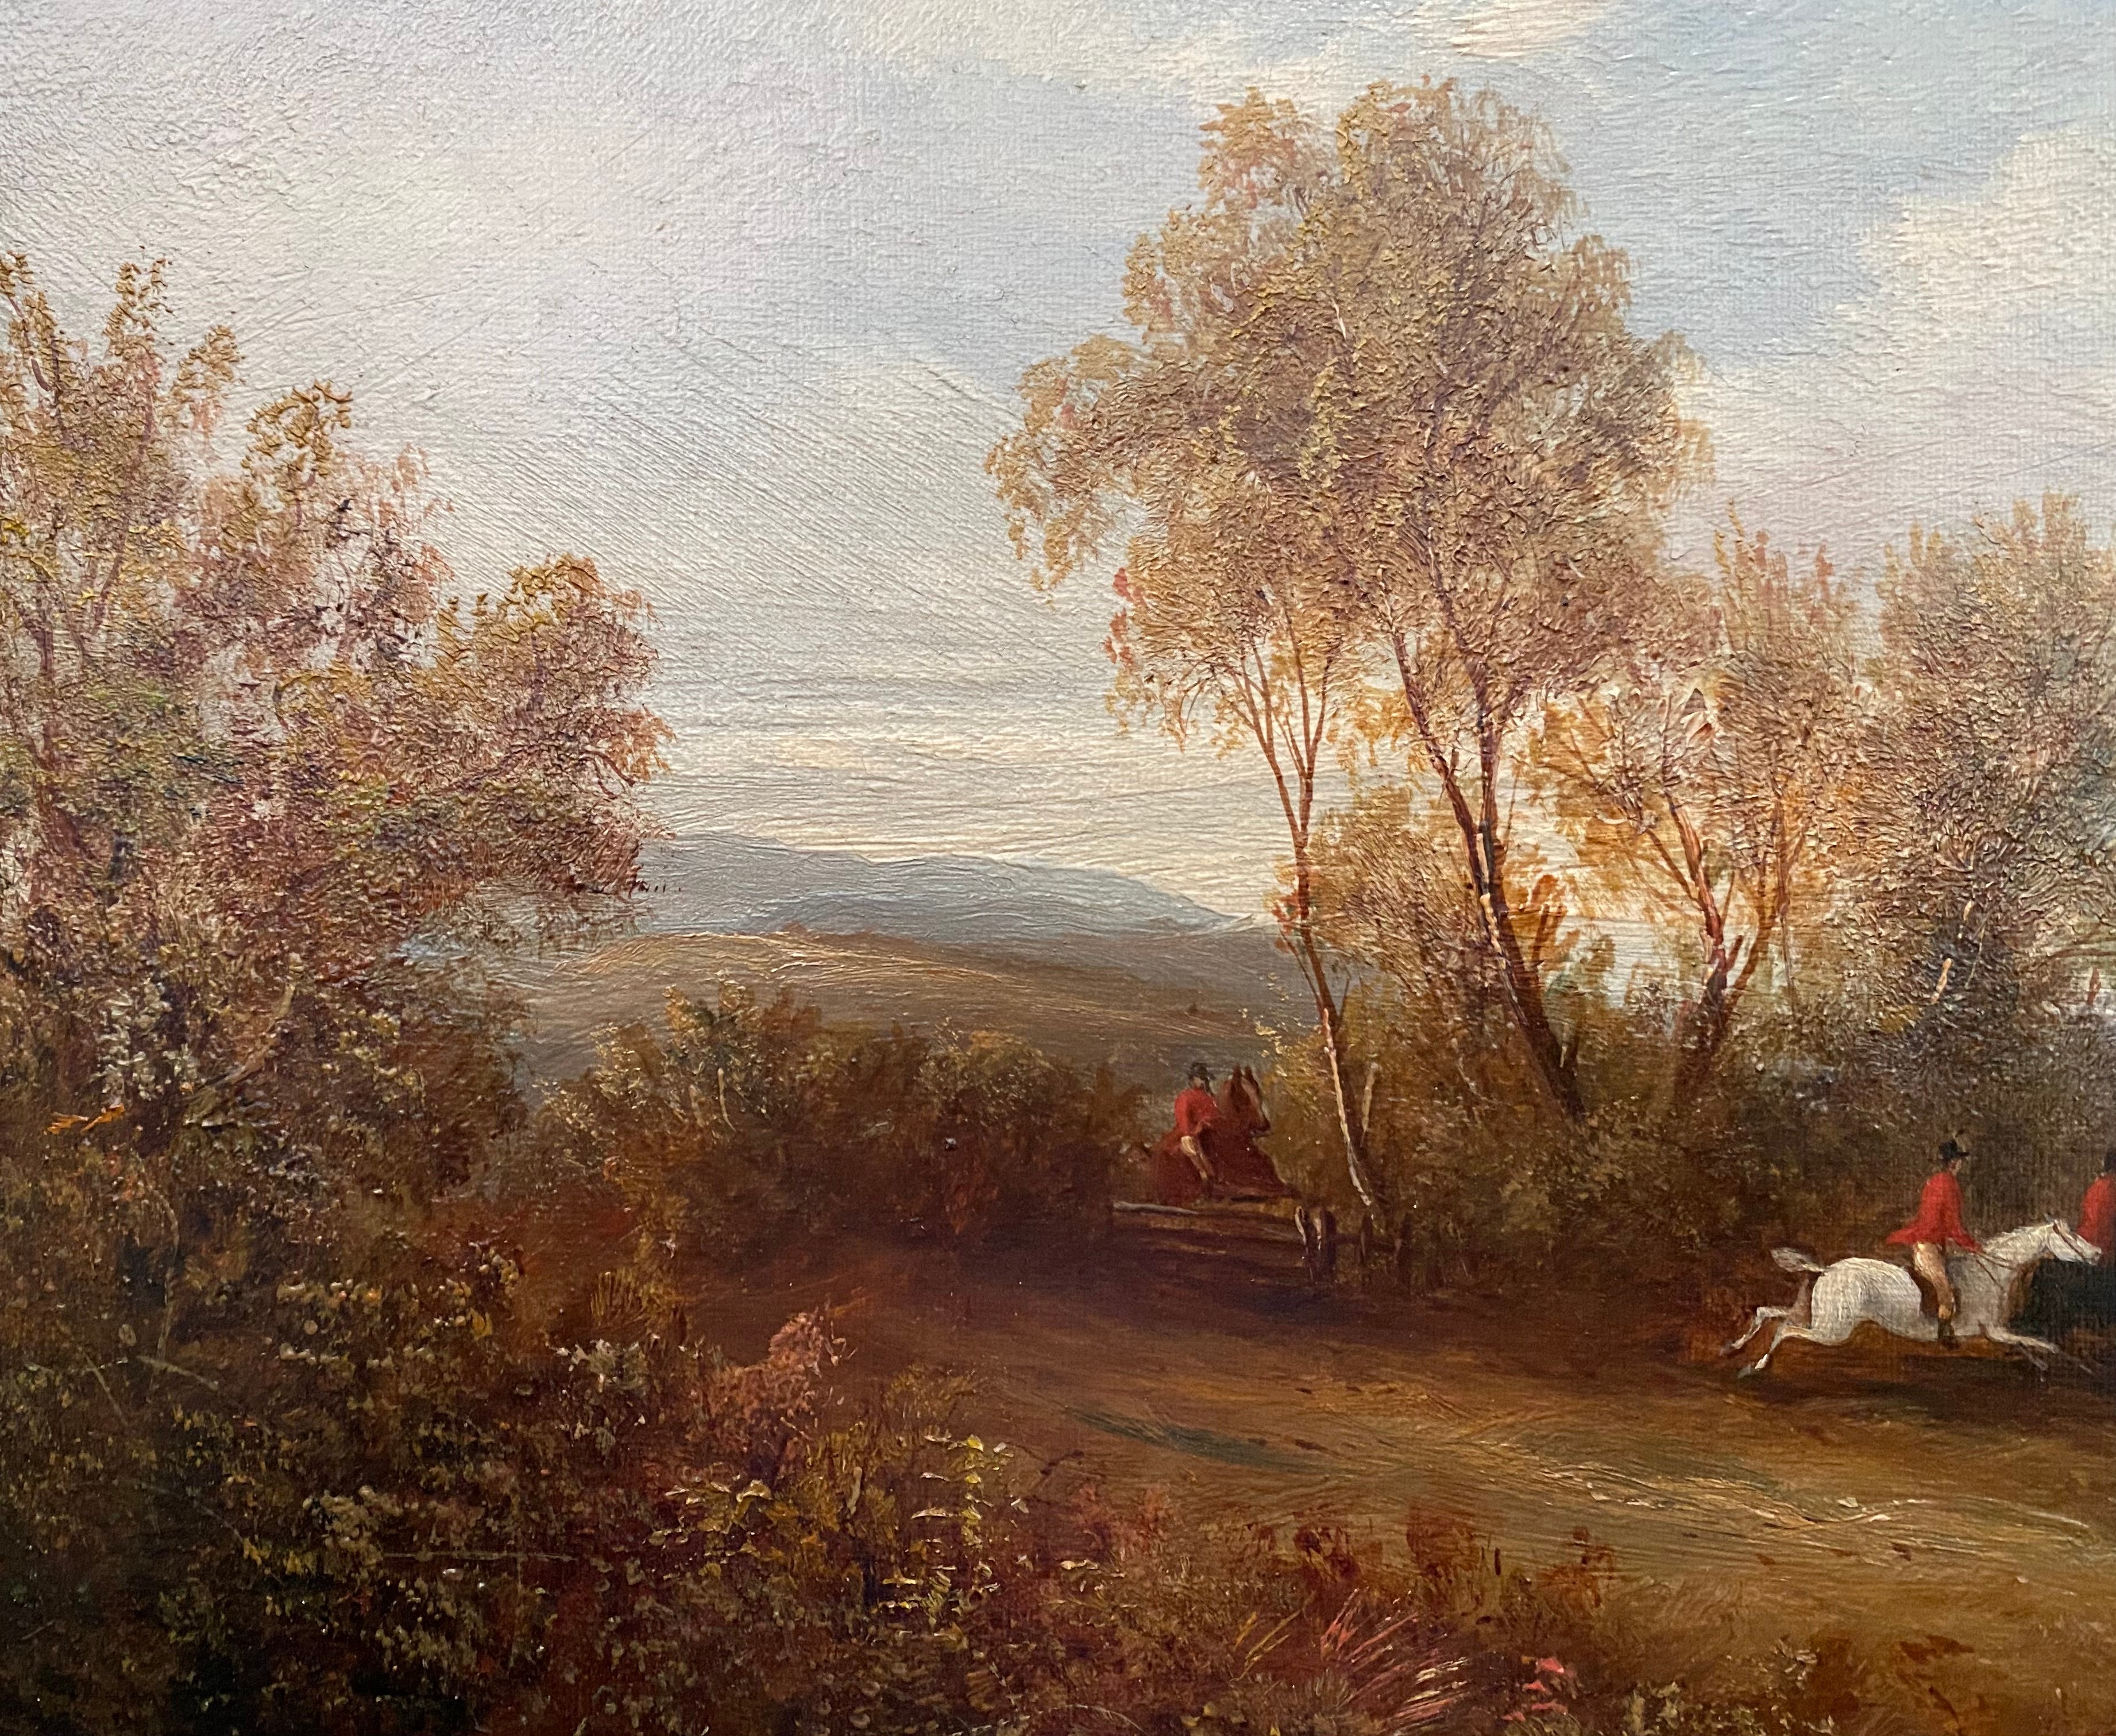 H. SHERBORNE 19THC OIL ON CANVAS - HUNTING PART ON THE SCENT - SIGNED LOWER LEFT (SIMILAR SOLD AT - Image 2 of 7